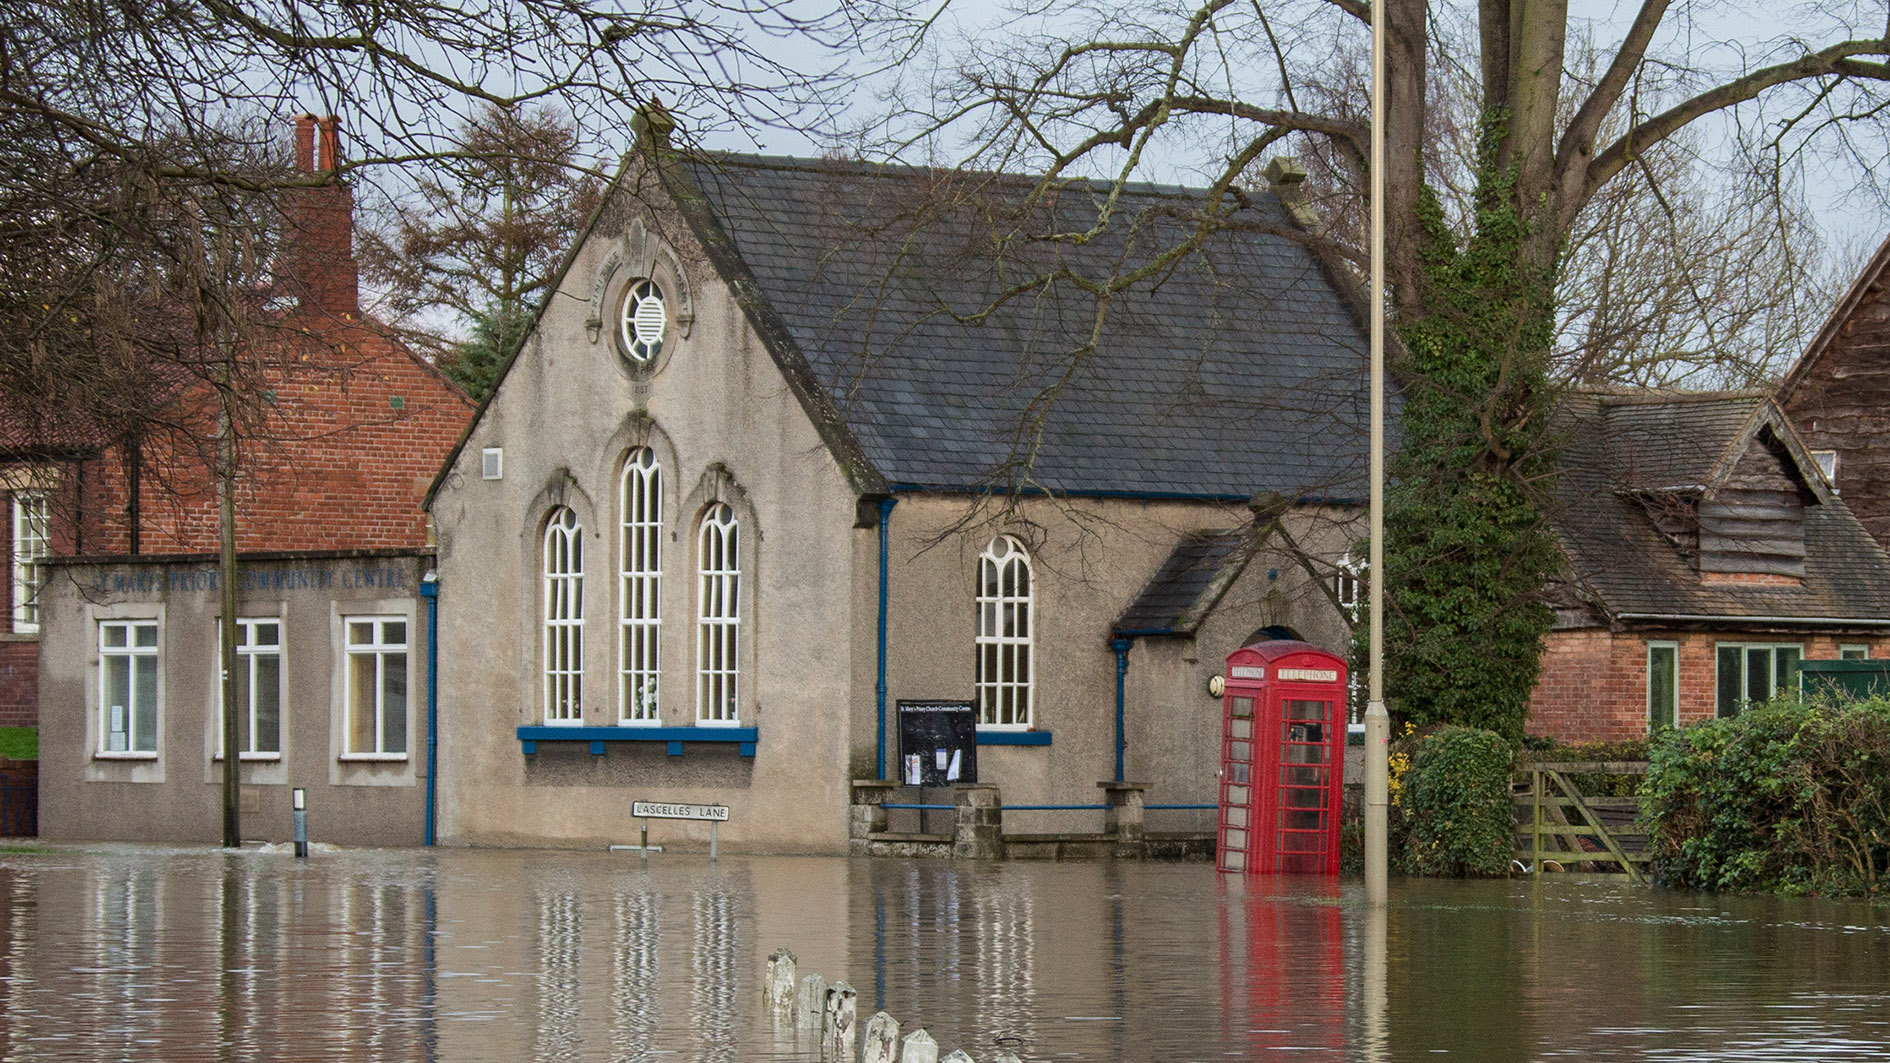 Flooding in a UK village